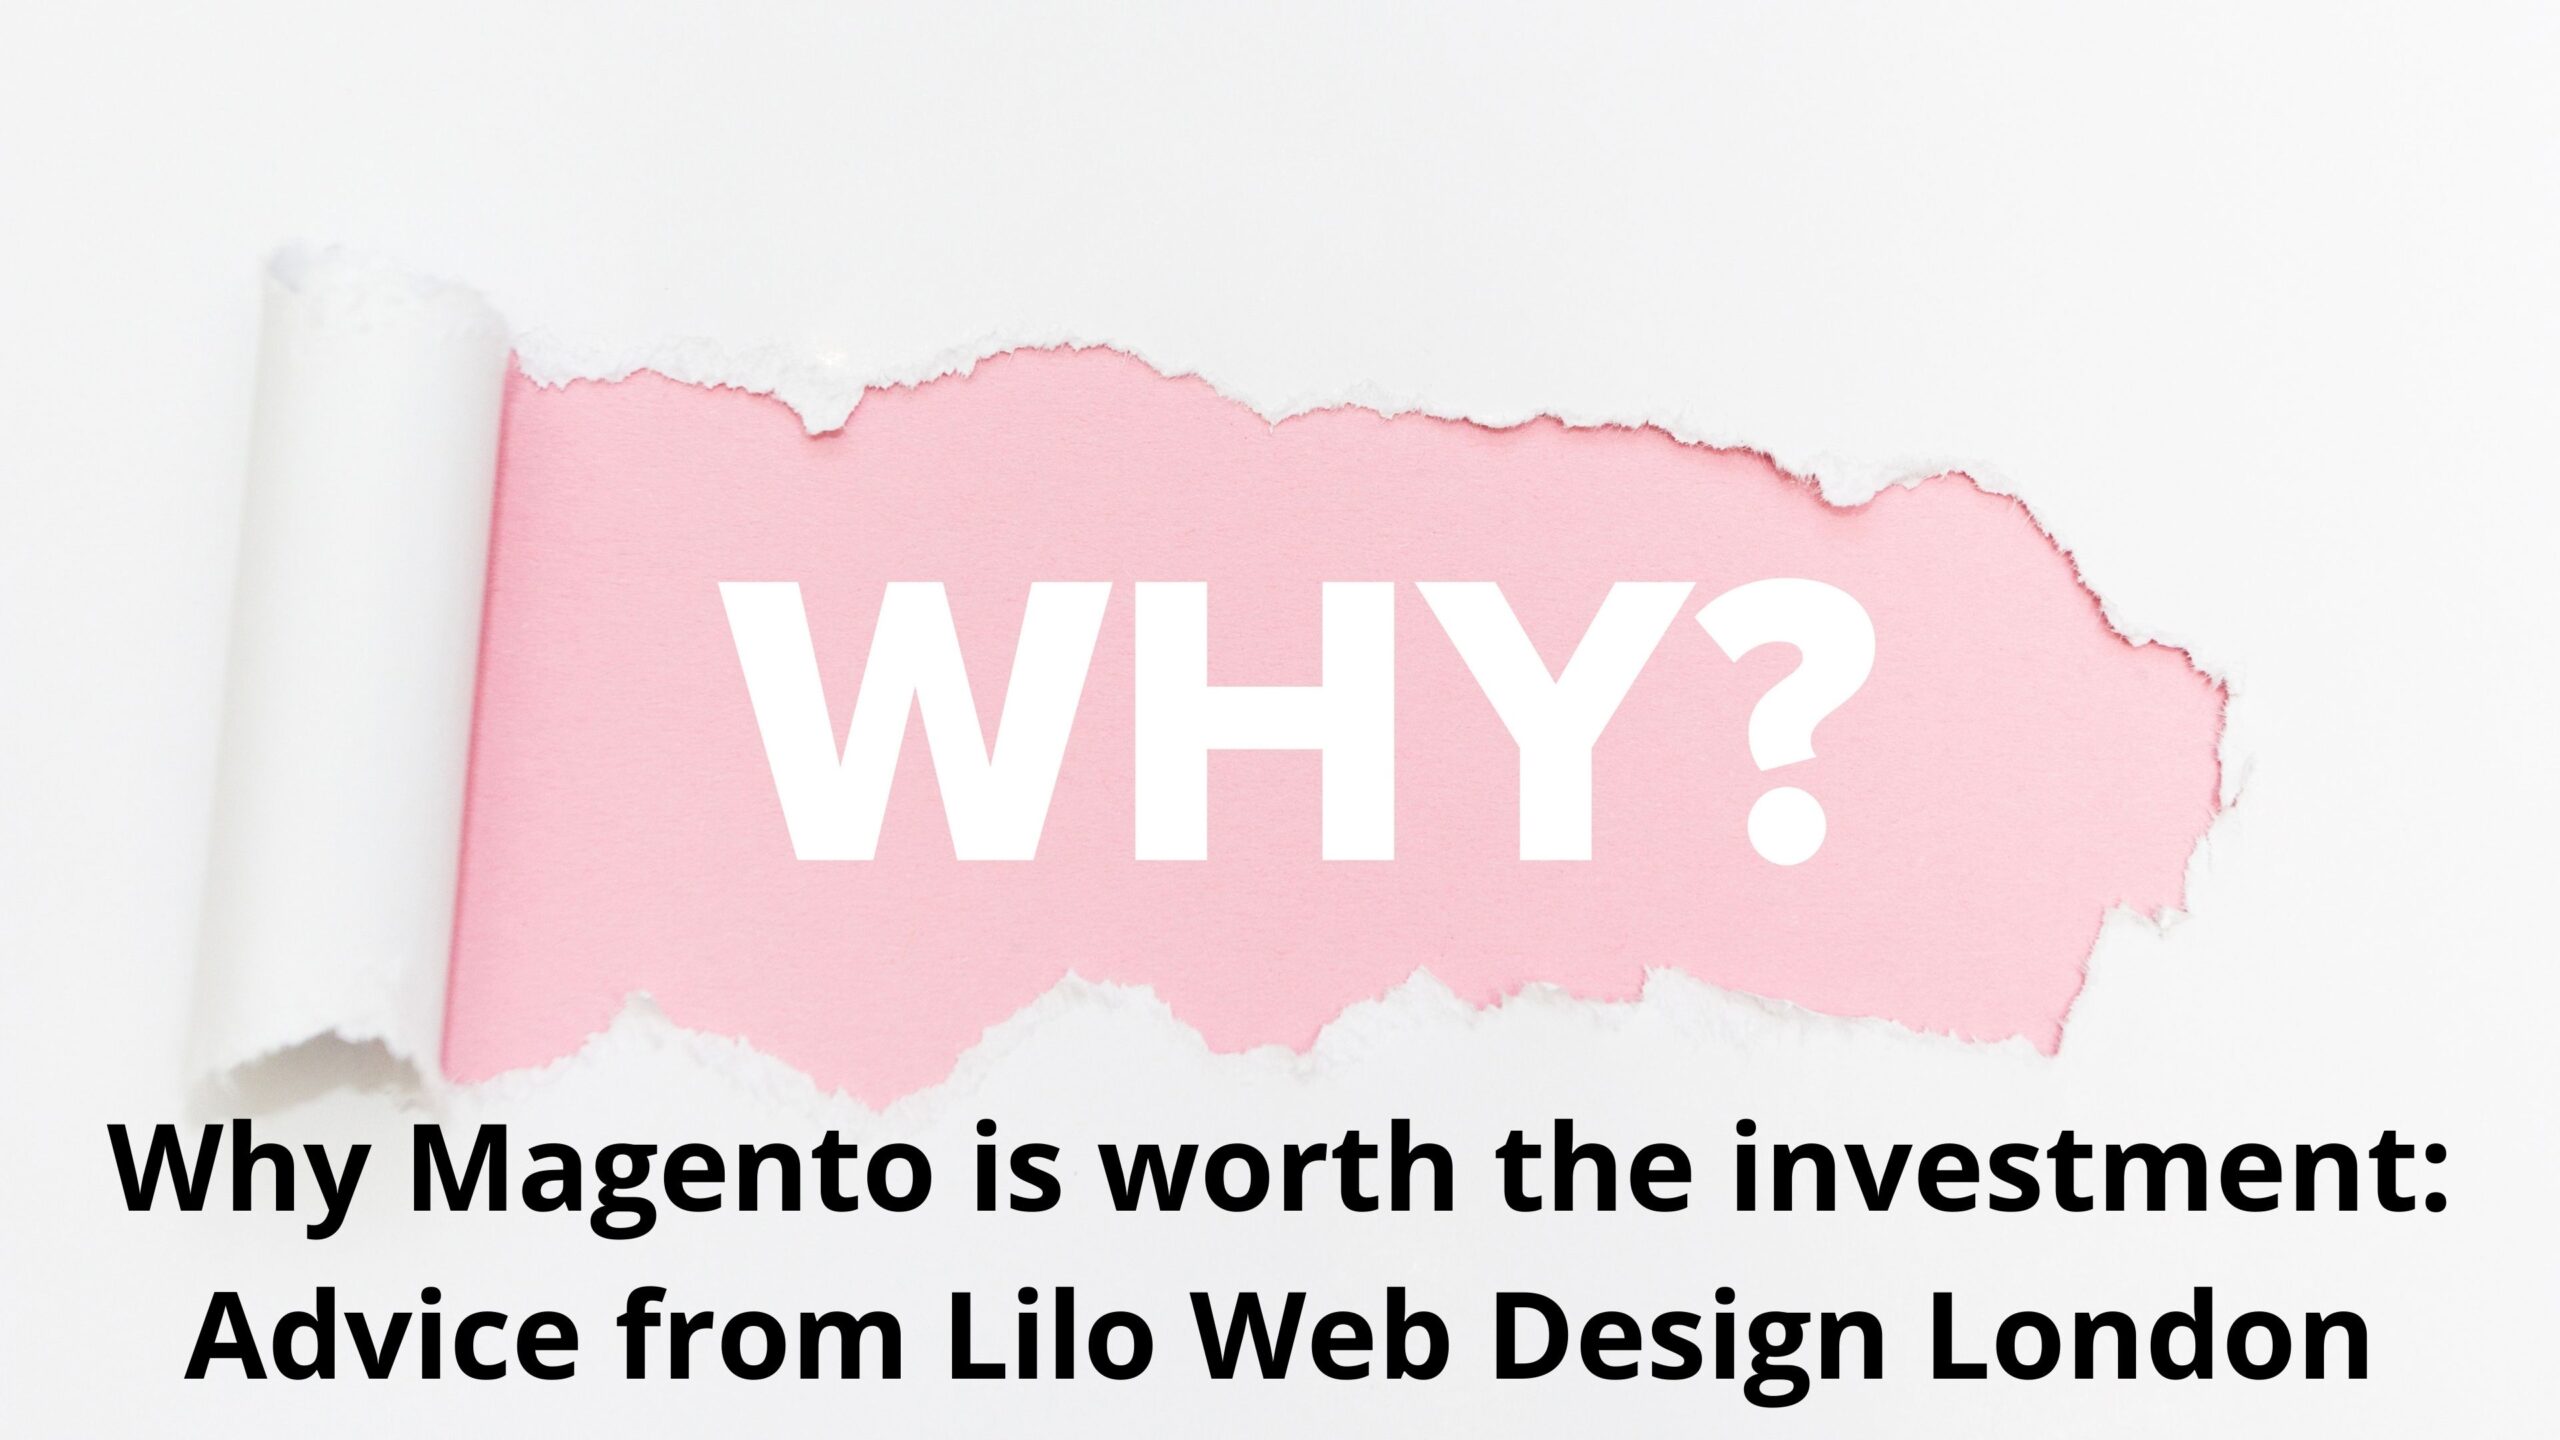 Why Magento is worth the investment: Advice from Lilo Web Design London